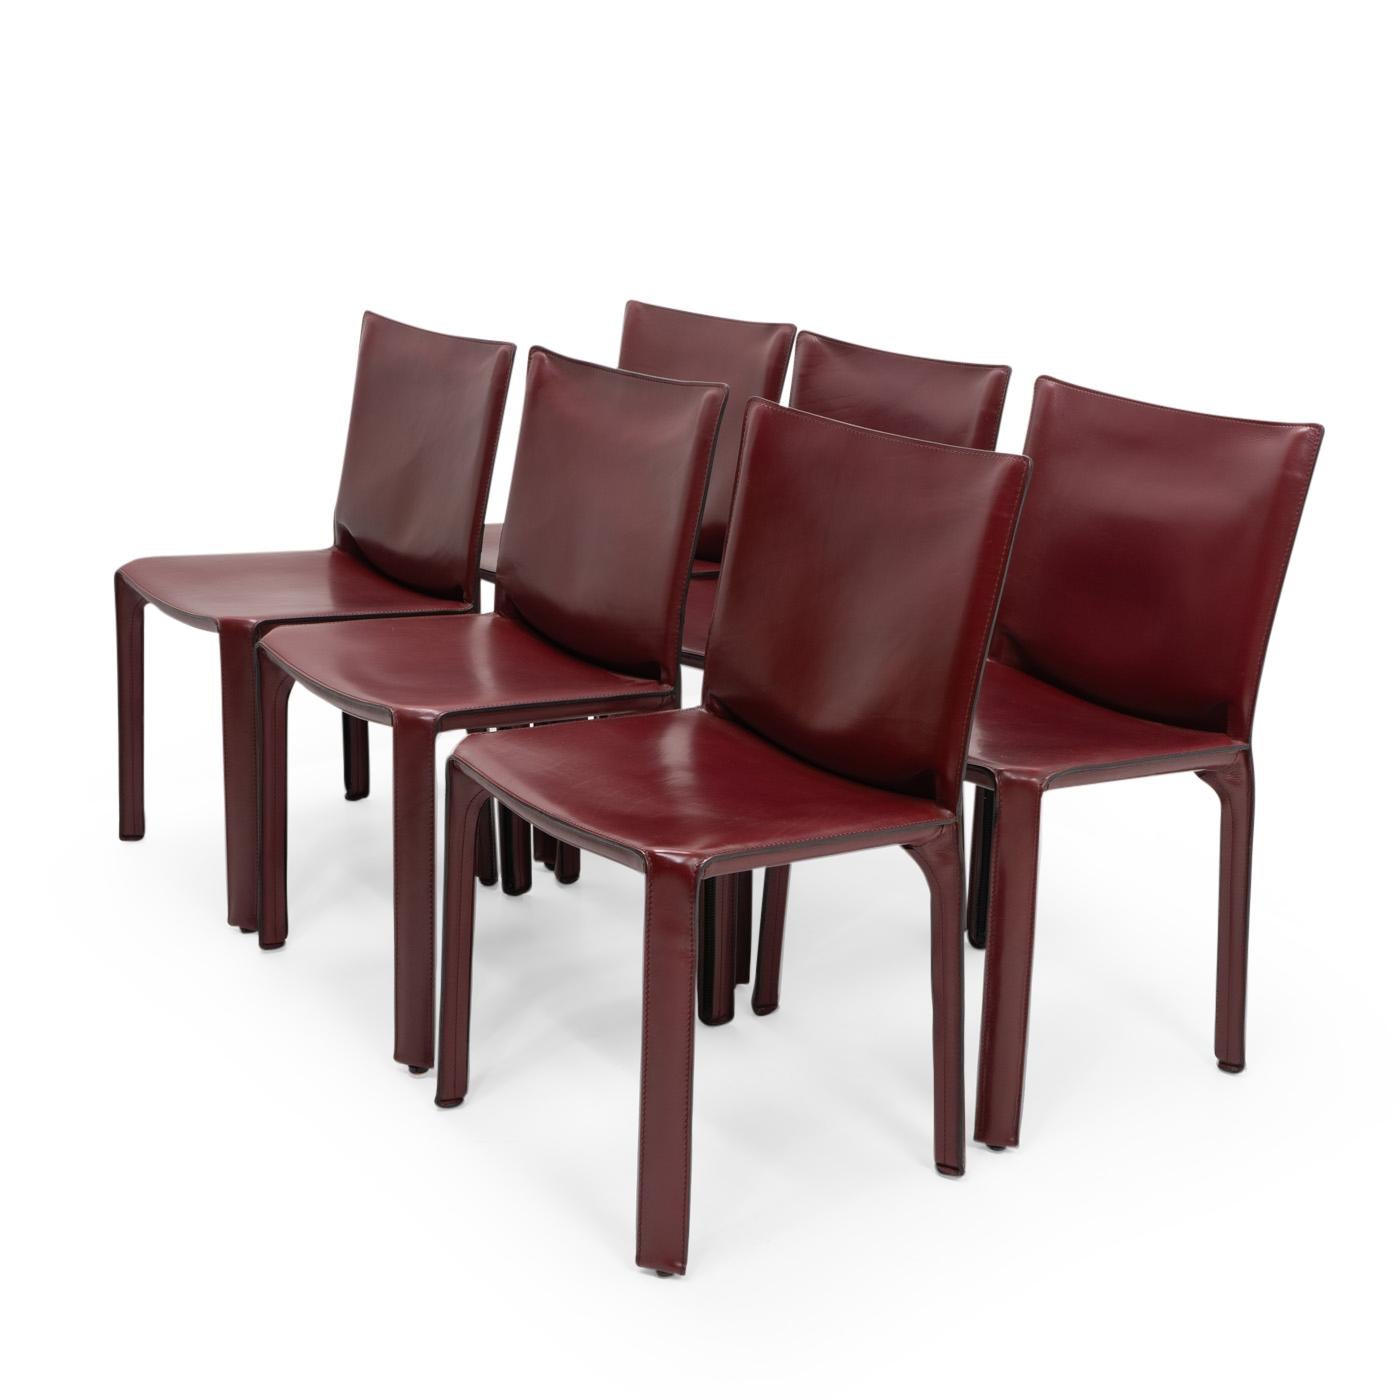 Set of six Cab 412 side chairs in bordeaux red leather by Mario Bellini for Cassina.

The Cab chair is built up as a tubular frame over which thick saddle leather is fitted; the leather skin is kept in place with zippers on the inside legs.

A